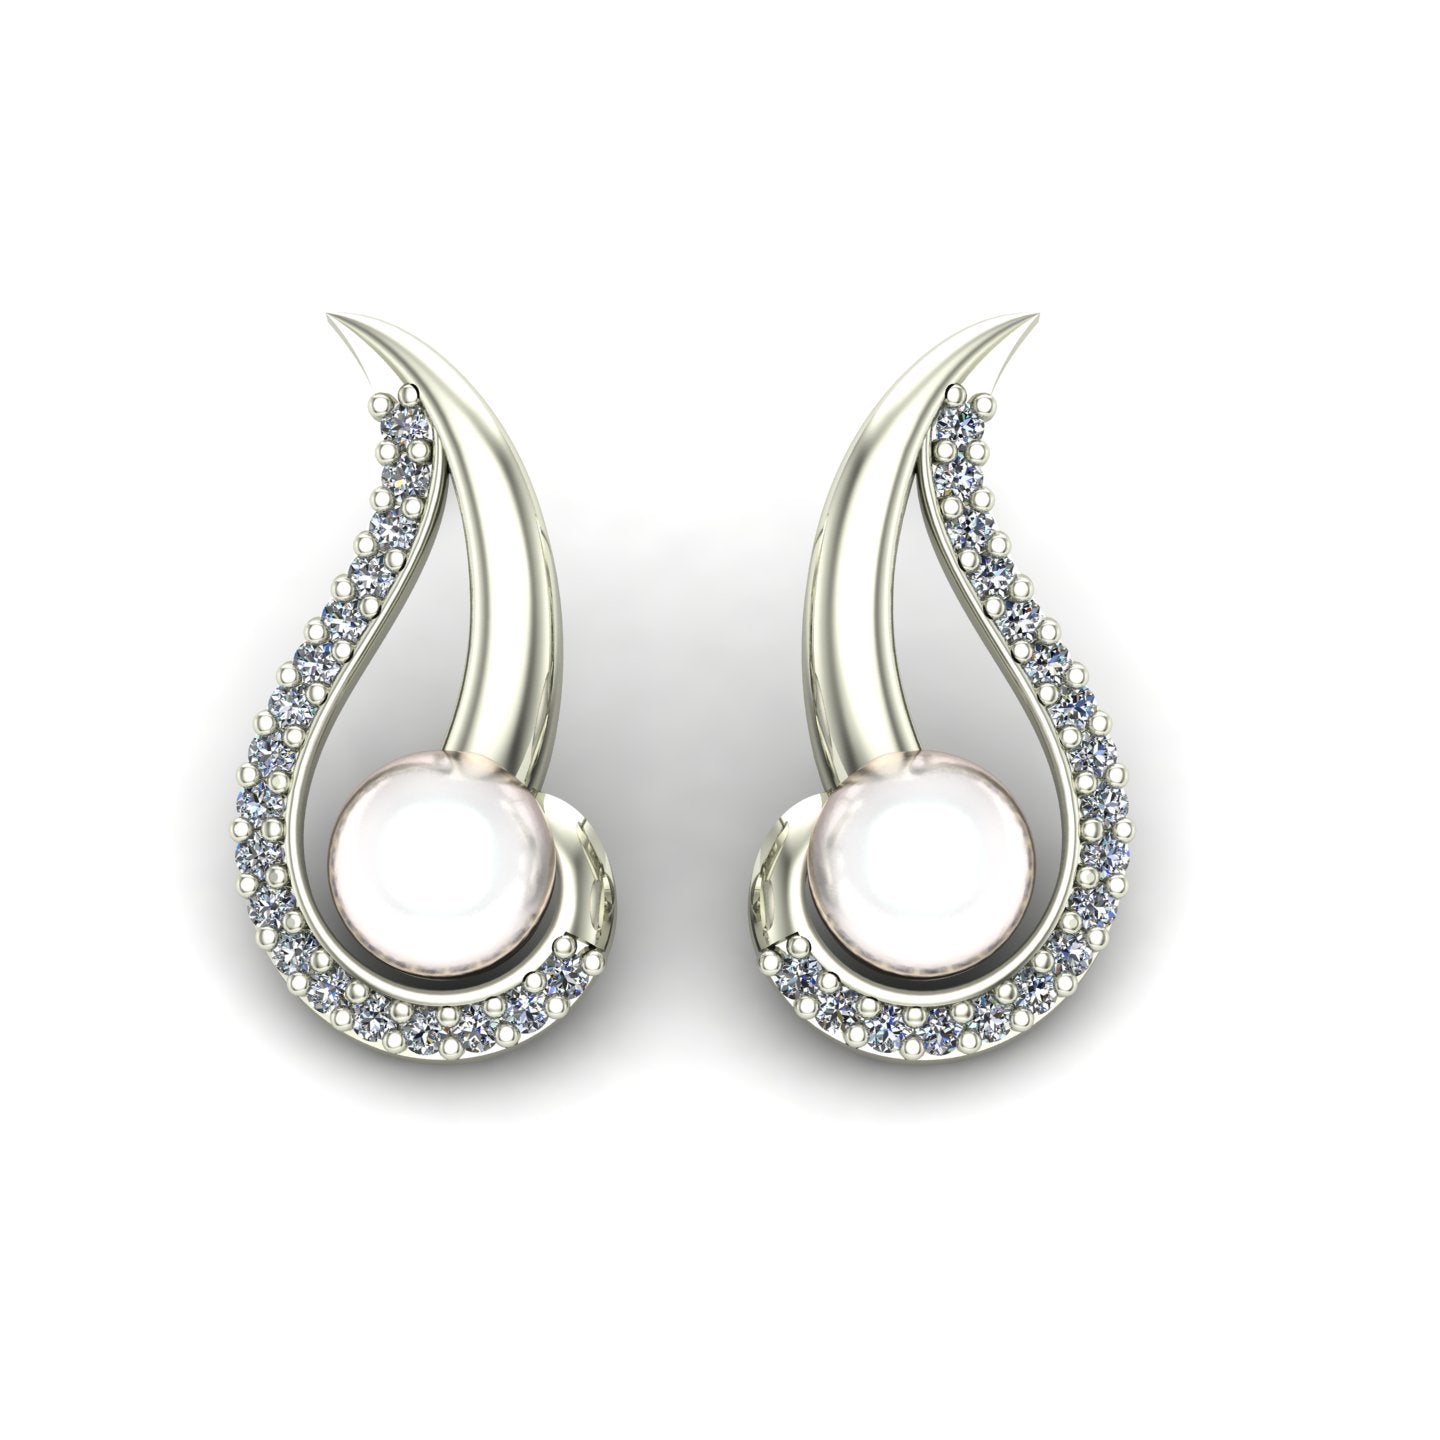 pearl and diamond swirl earrings in 14k white gold - Charles Babb Designs - top view